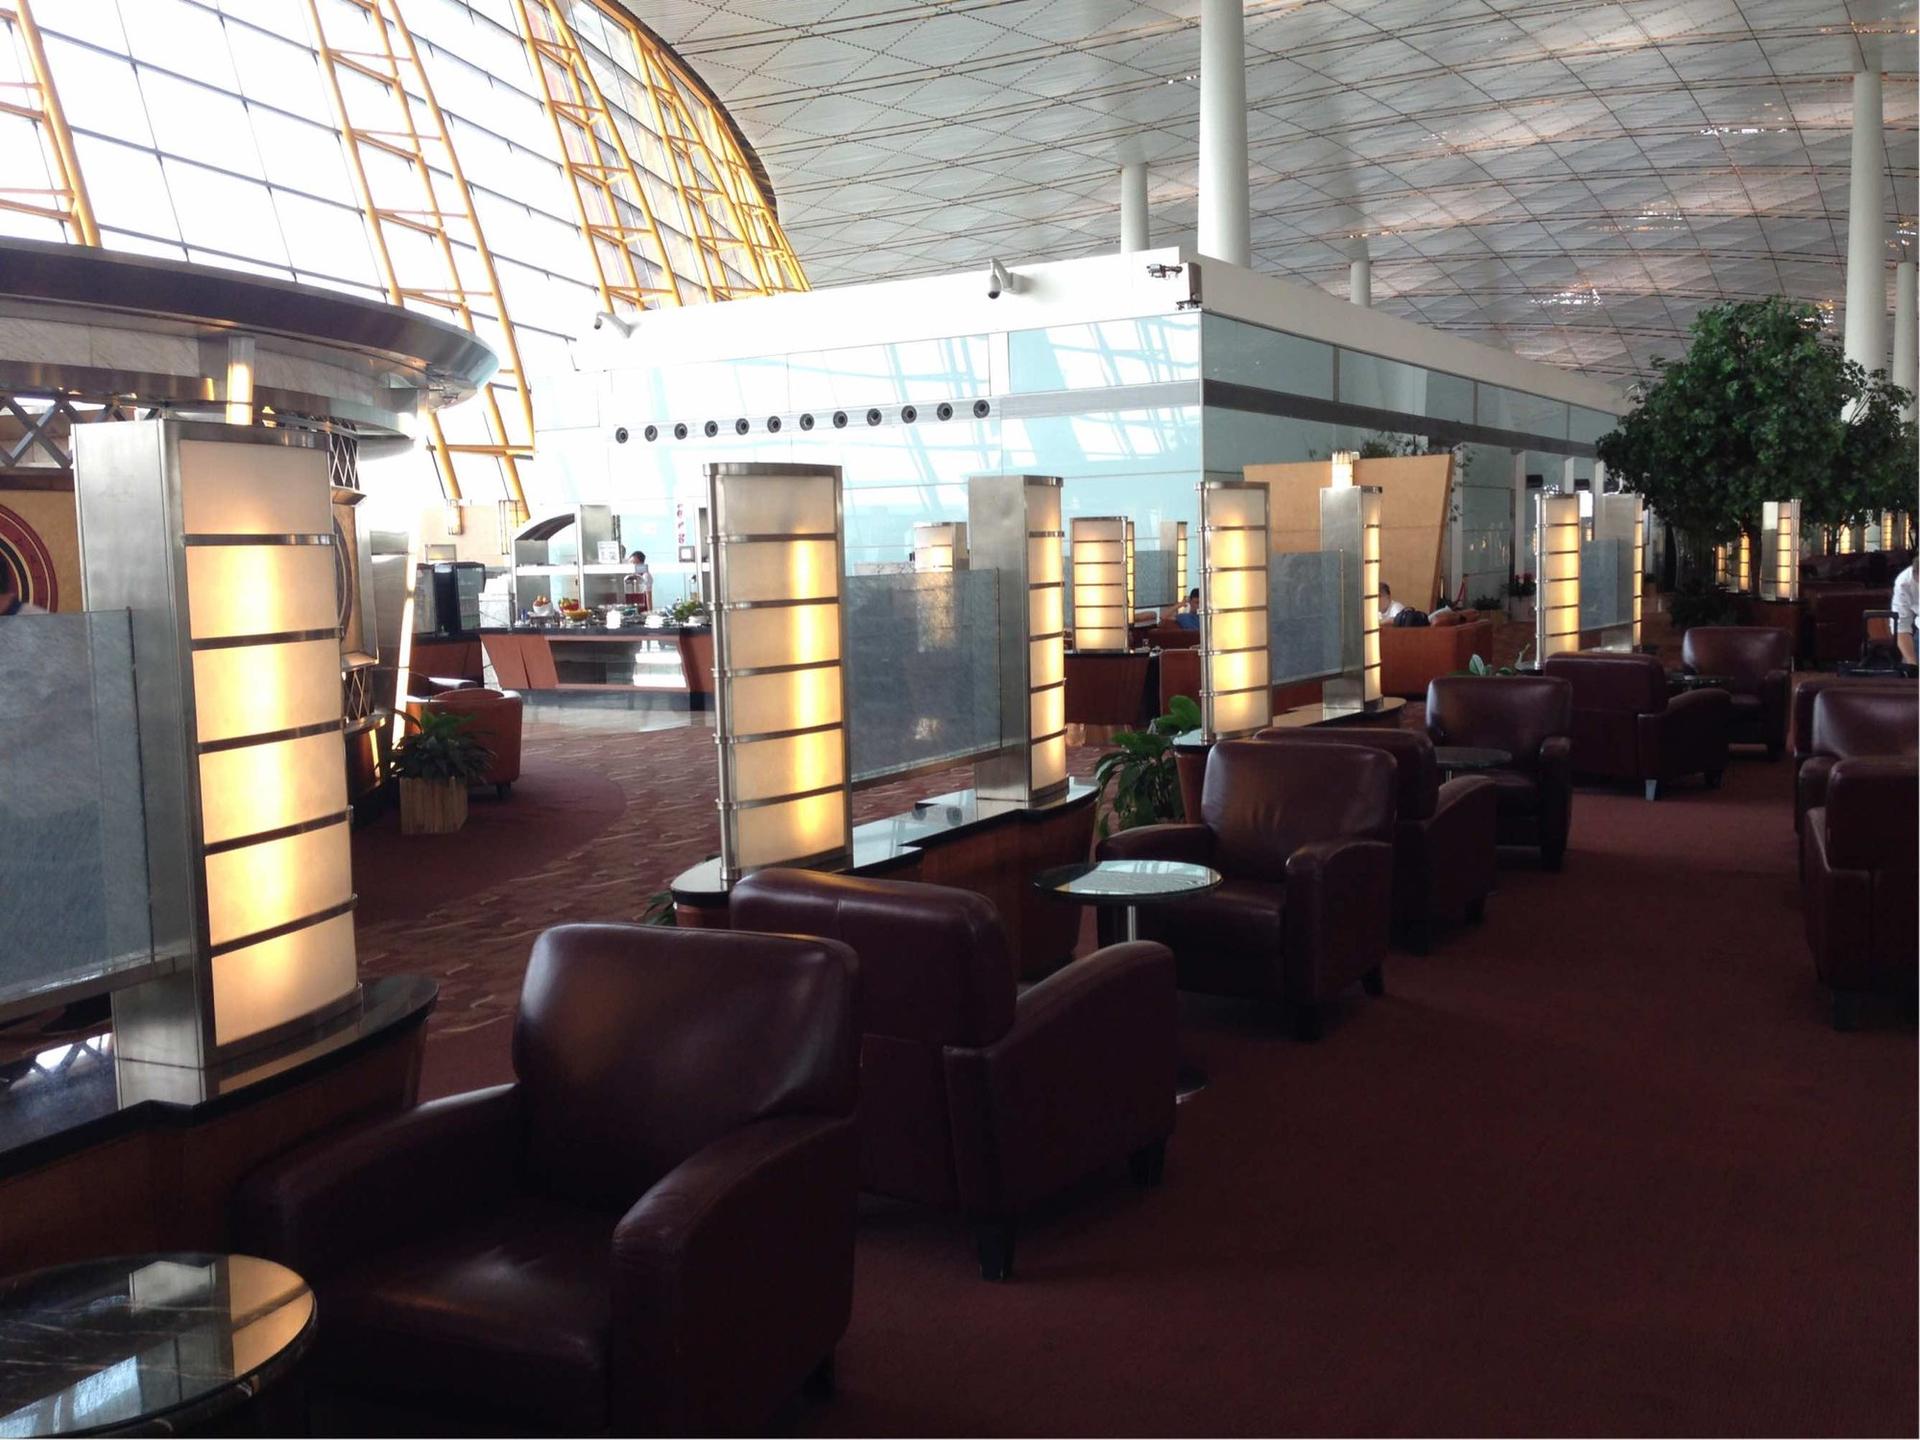 Air China International First Class Lounge image 2 of 38